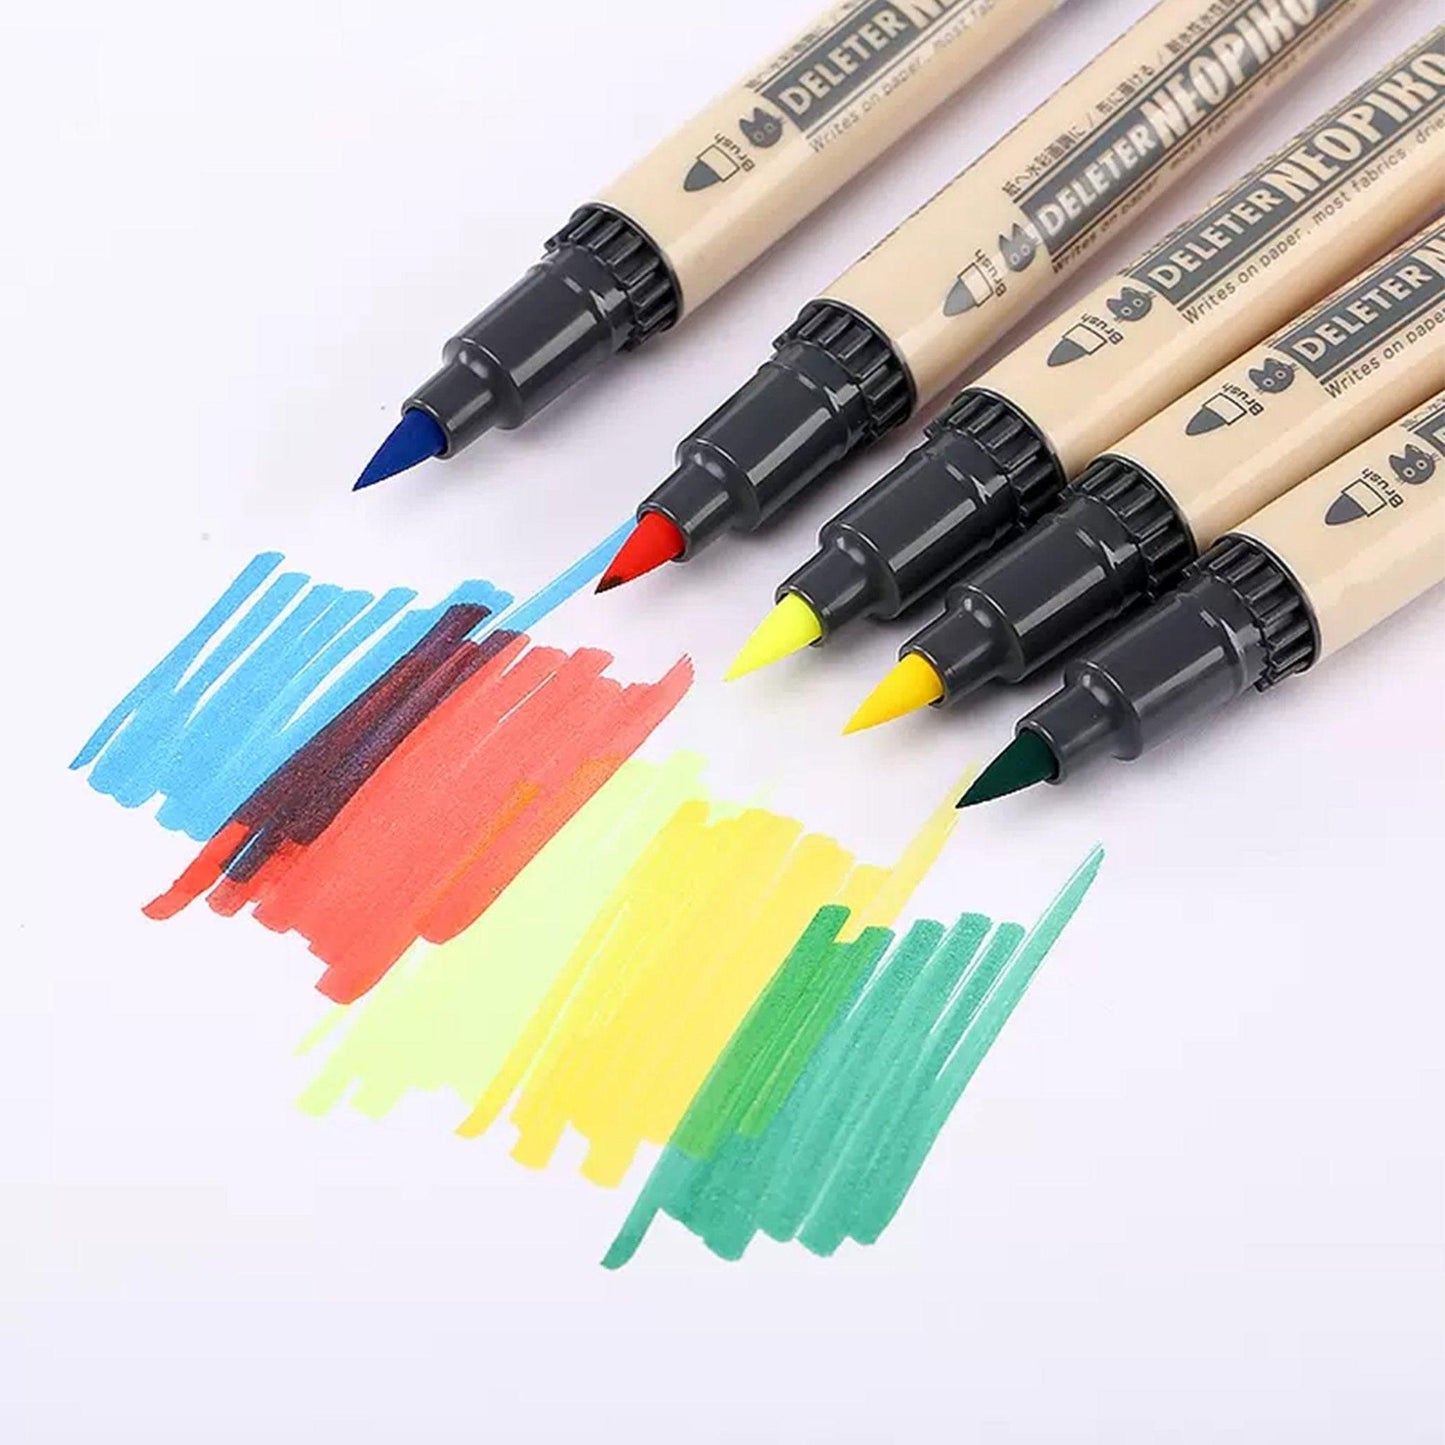 Deleter NEOPIKO-3 Fabric Marker Fabric Painting Pen Double Head Painting Pen Water-Based Pen - CHL-STORE 